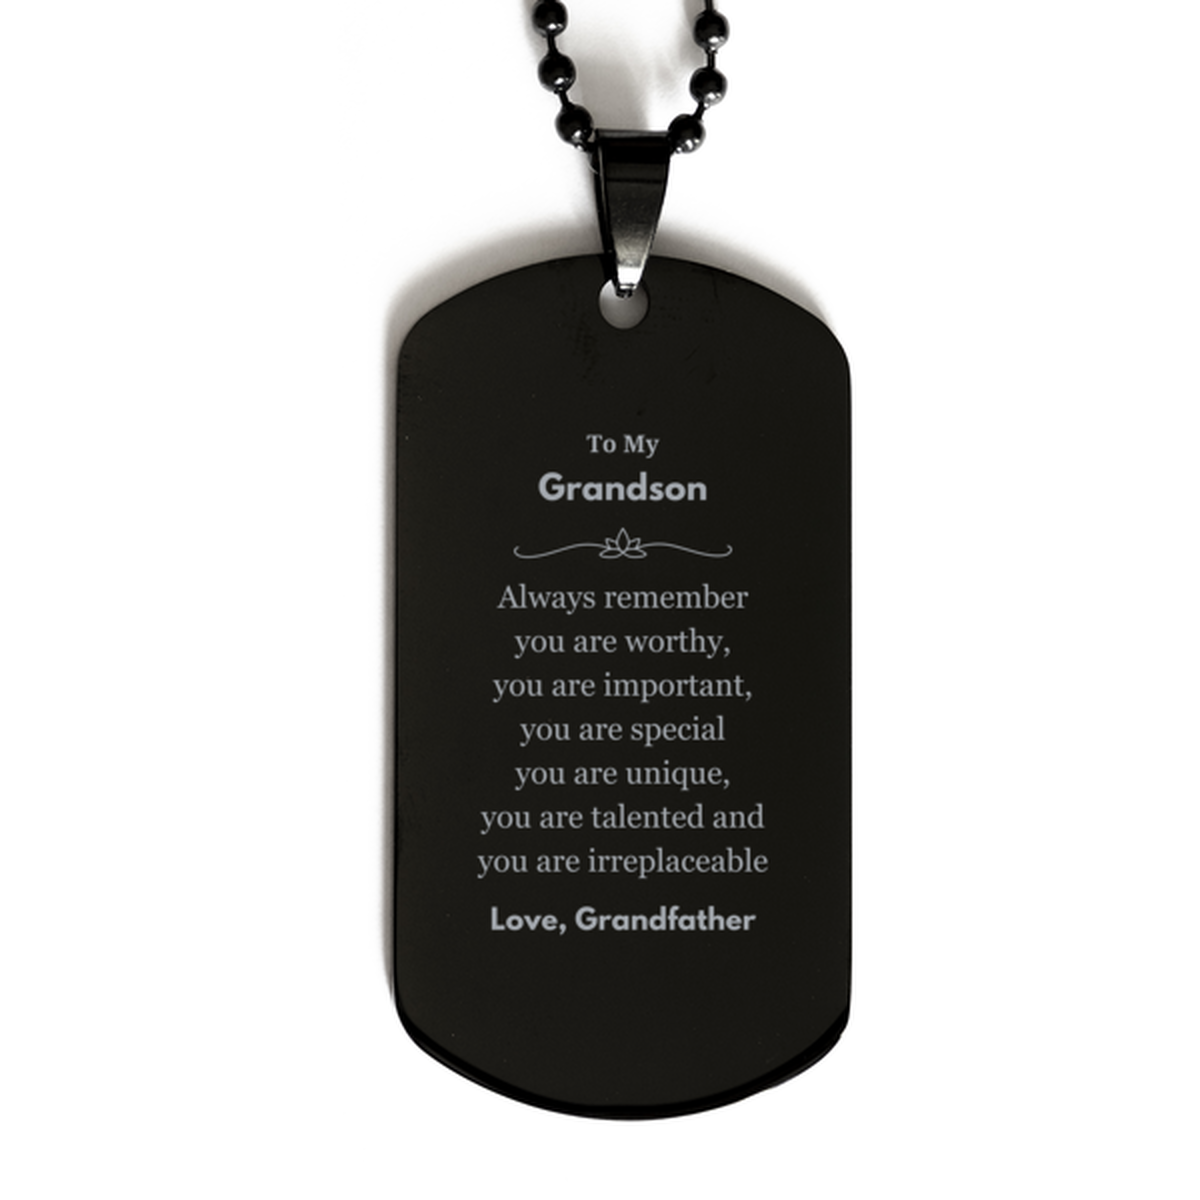 Grandson Birthday Gifts from Grandfather, Inspirational Black Dog Tag for Grandson Christmas Graduation Gifts for Grandson Always remember you are worthy, you are important. Love, Grandfather